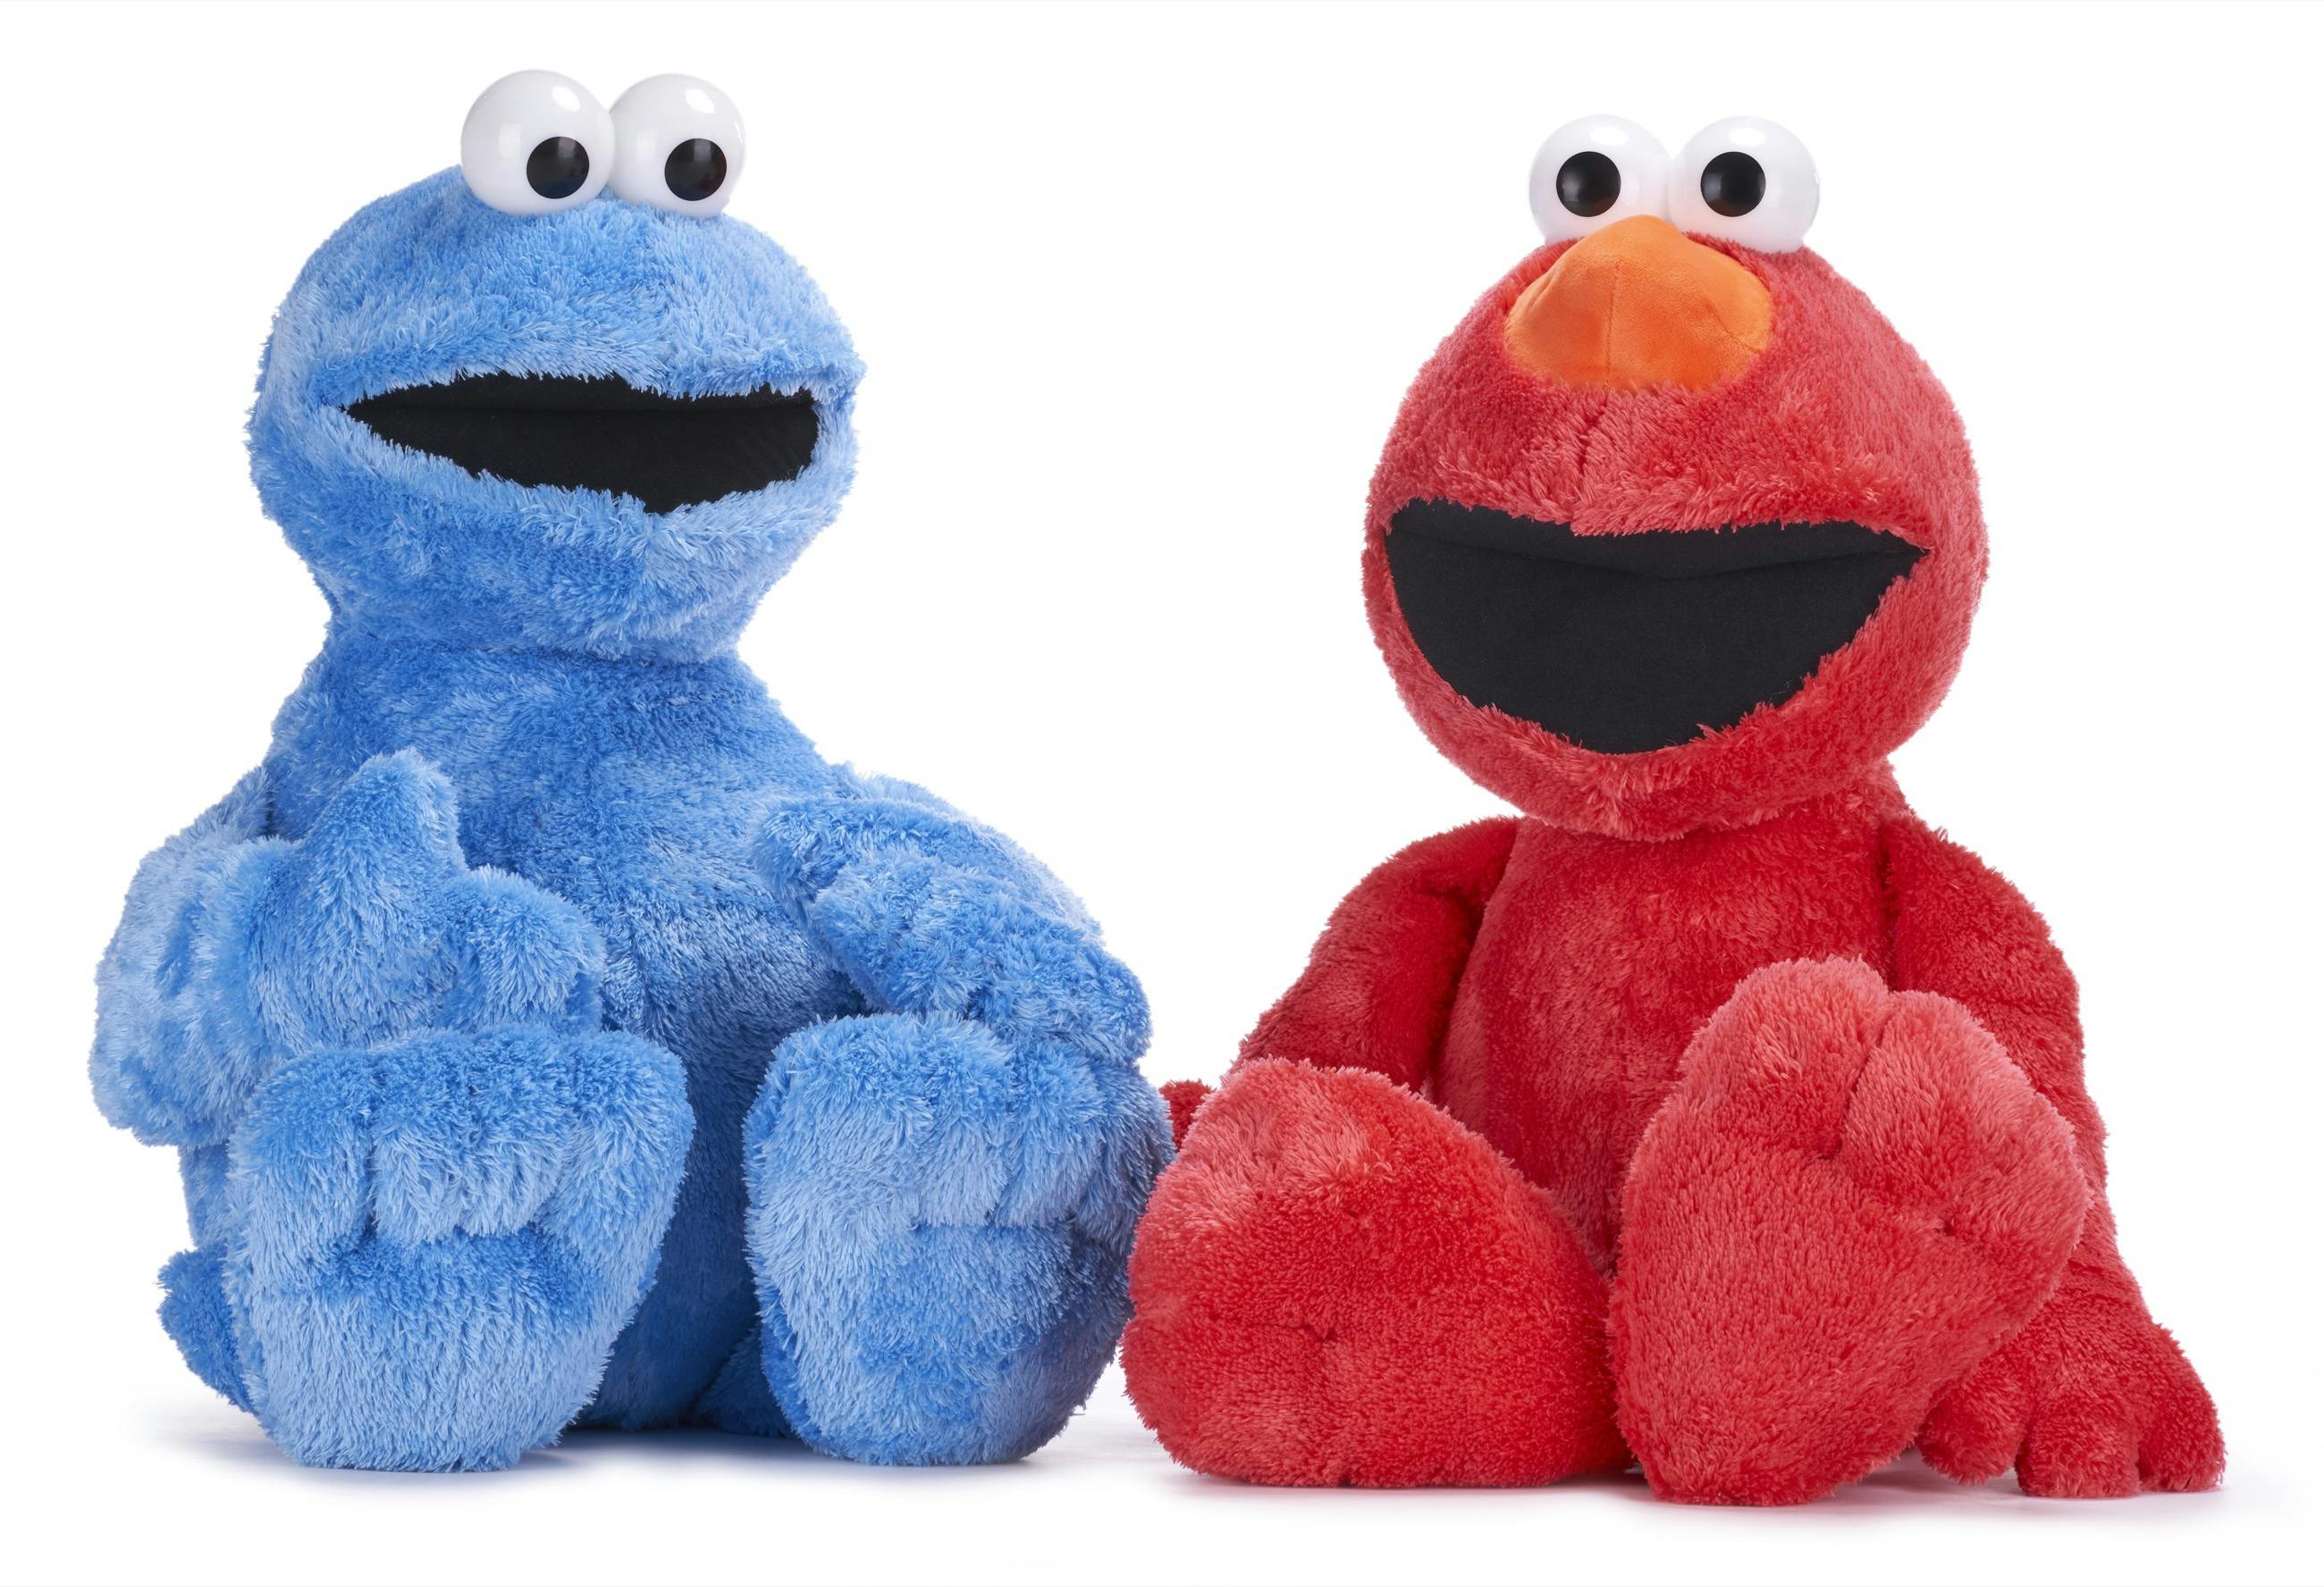 Product - Giant Elmo and Cookie